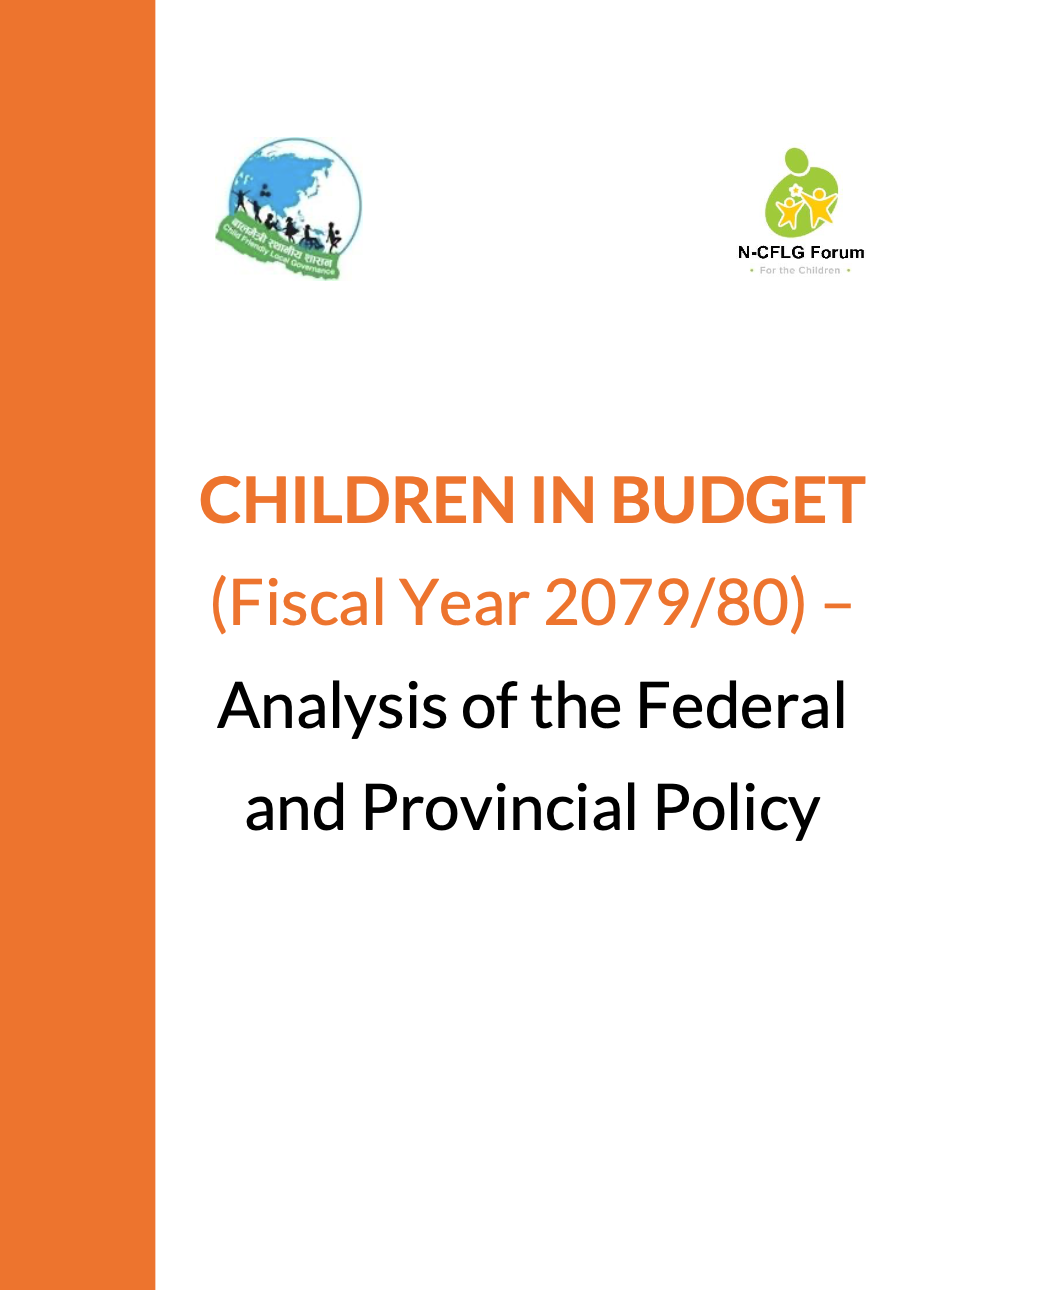 Analysis of the policy program and budget